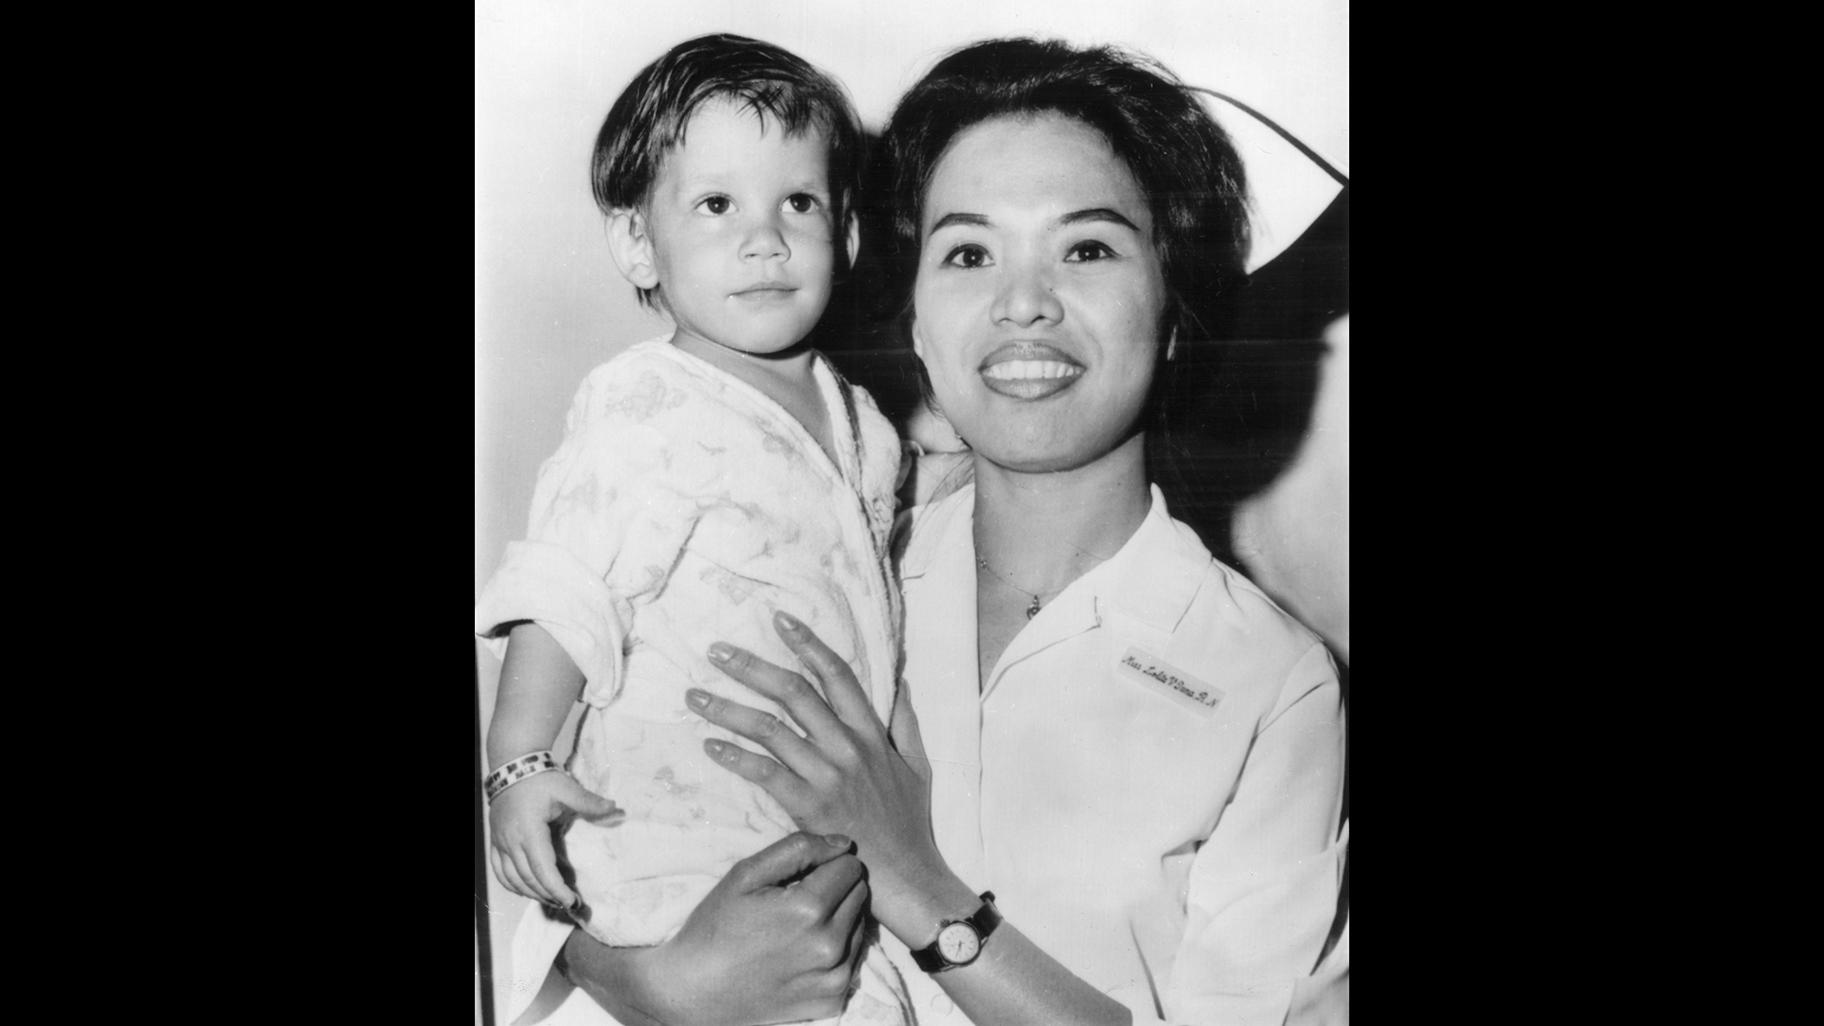 In this June 17, 1966 file photo, a boy, dubbed “Scott McKinley” by the State Child Service is held by Nurse Lolita V. Tana in Newark, N.J. McKinley has been adopted by Chester and Dora Fronczak, a Chicago couple who believe him to be their son kidnapped in 1964. (AP Photo, File)